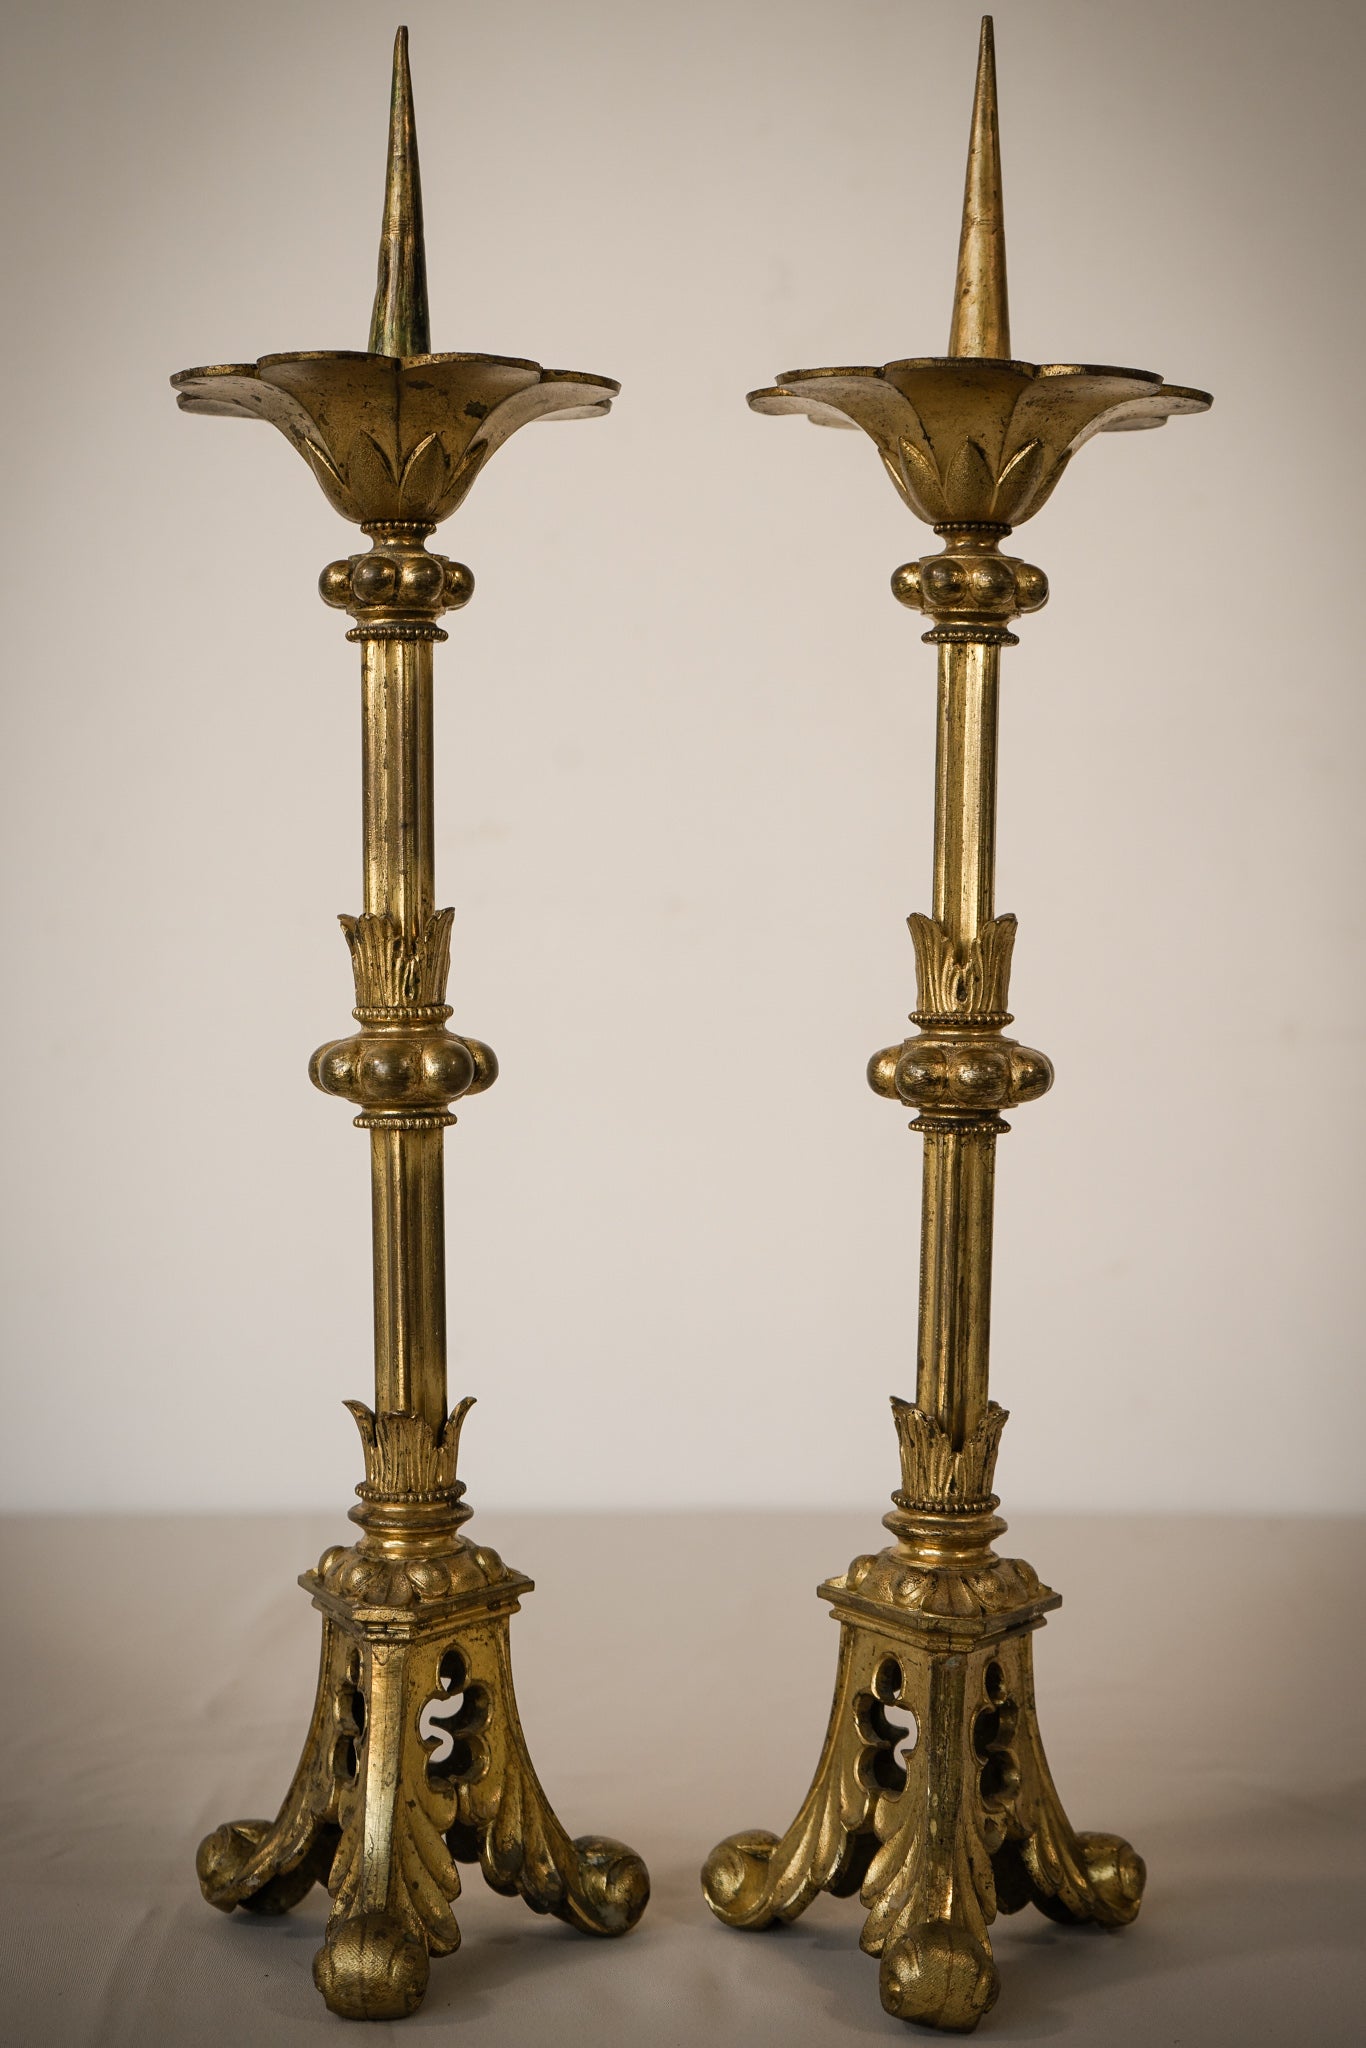 Pair of Antique Brass Church Candle Holders -  Canada